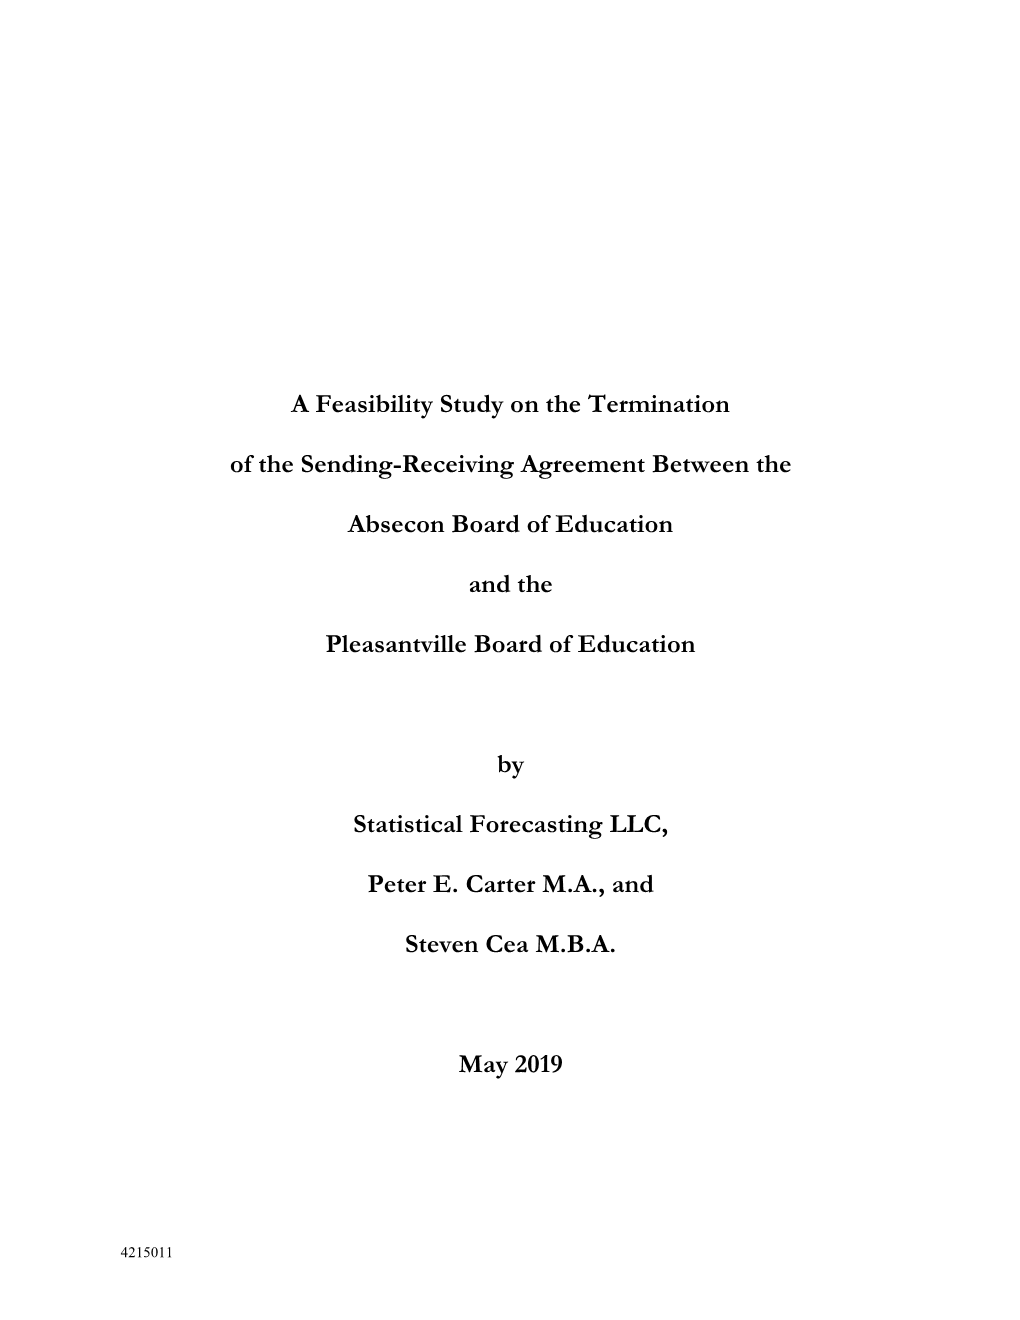 A Feasibility Study on the Termination of the Sending-Receiving